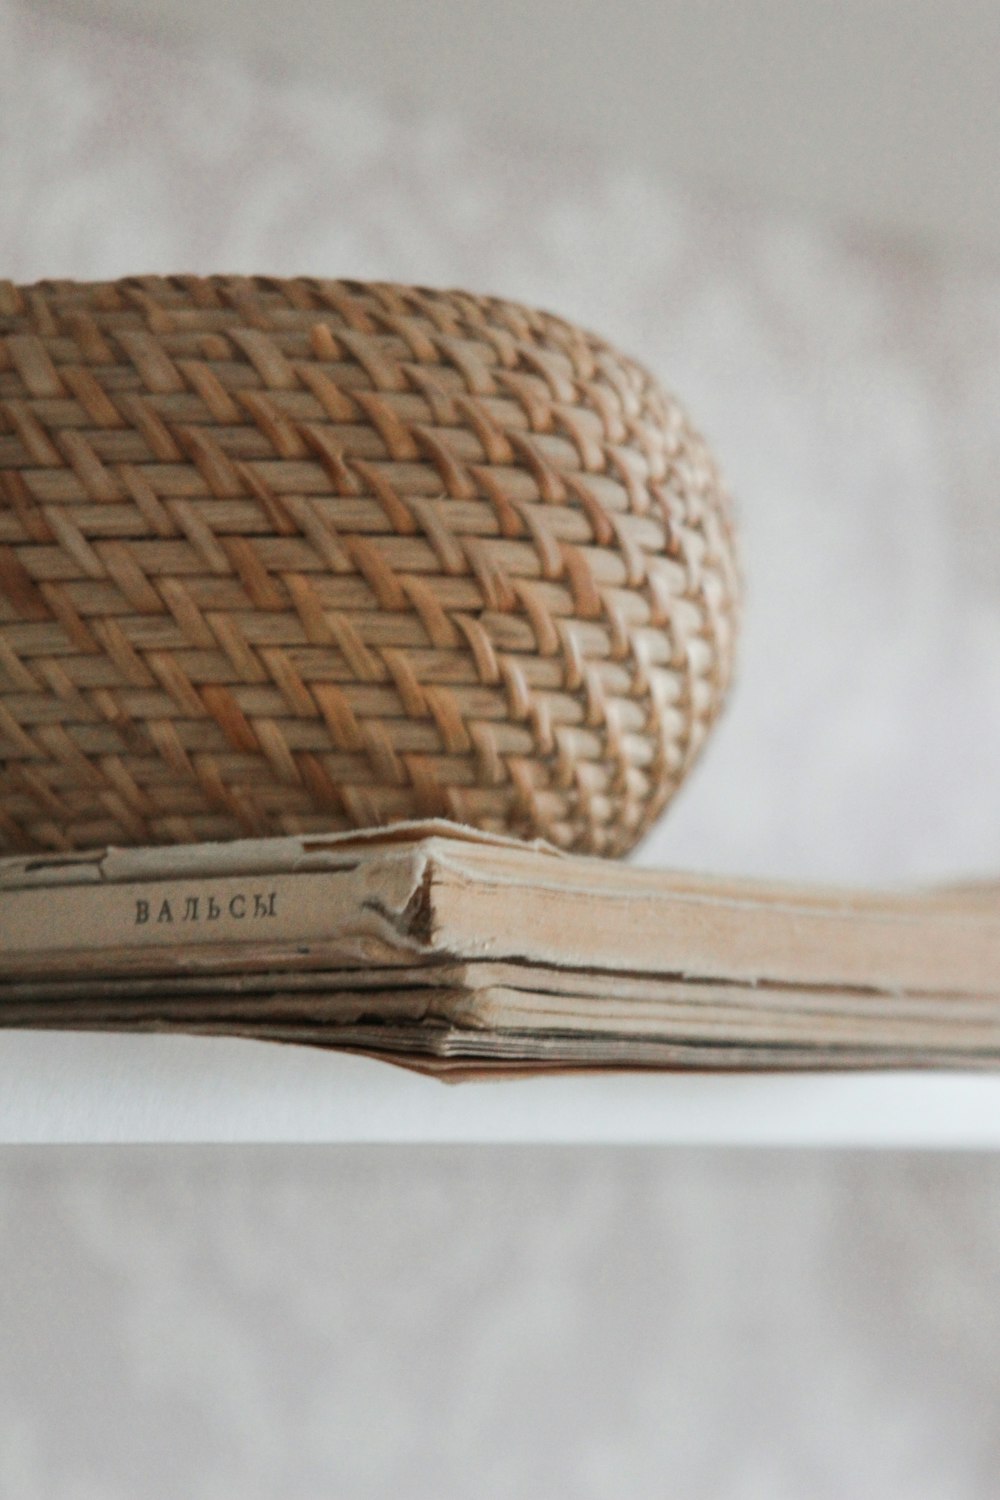 brown woven round basket on white table